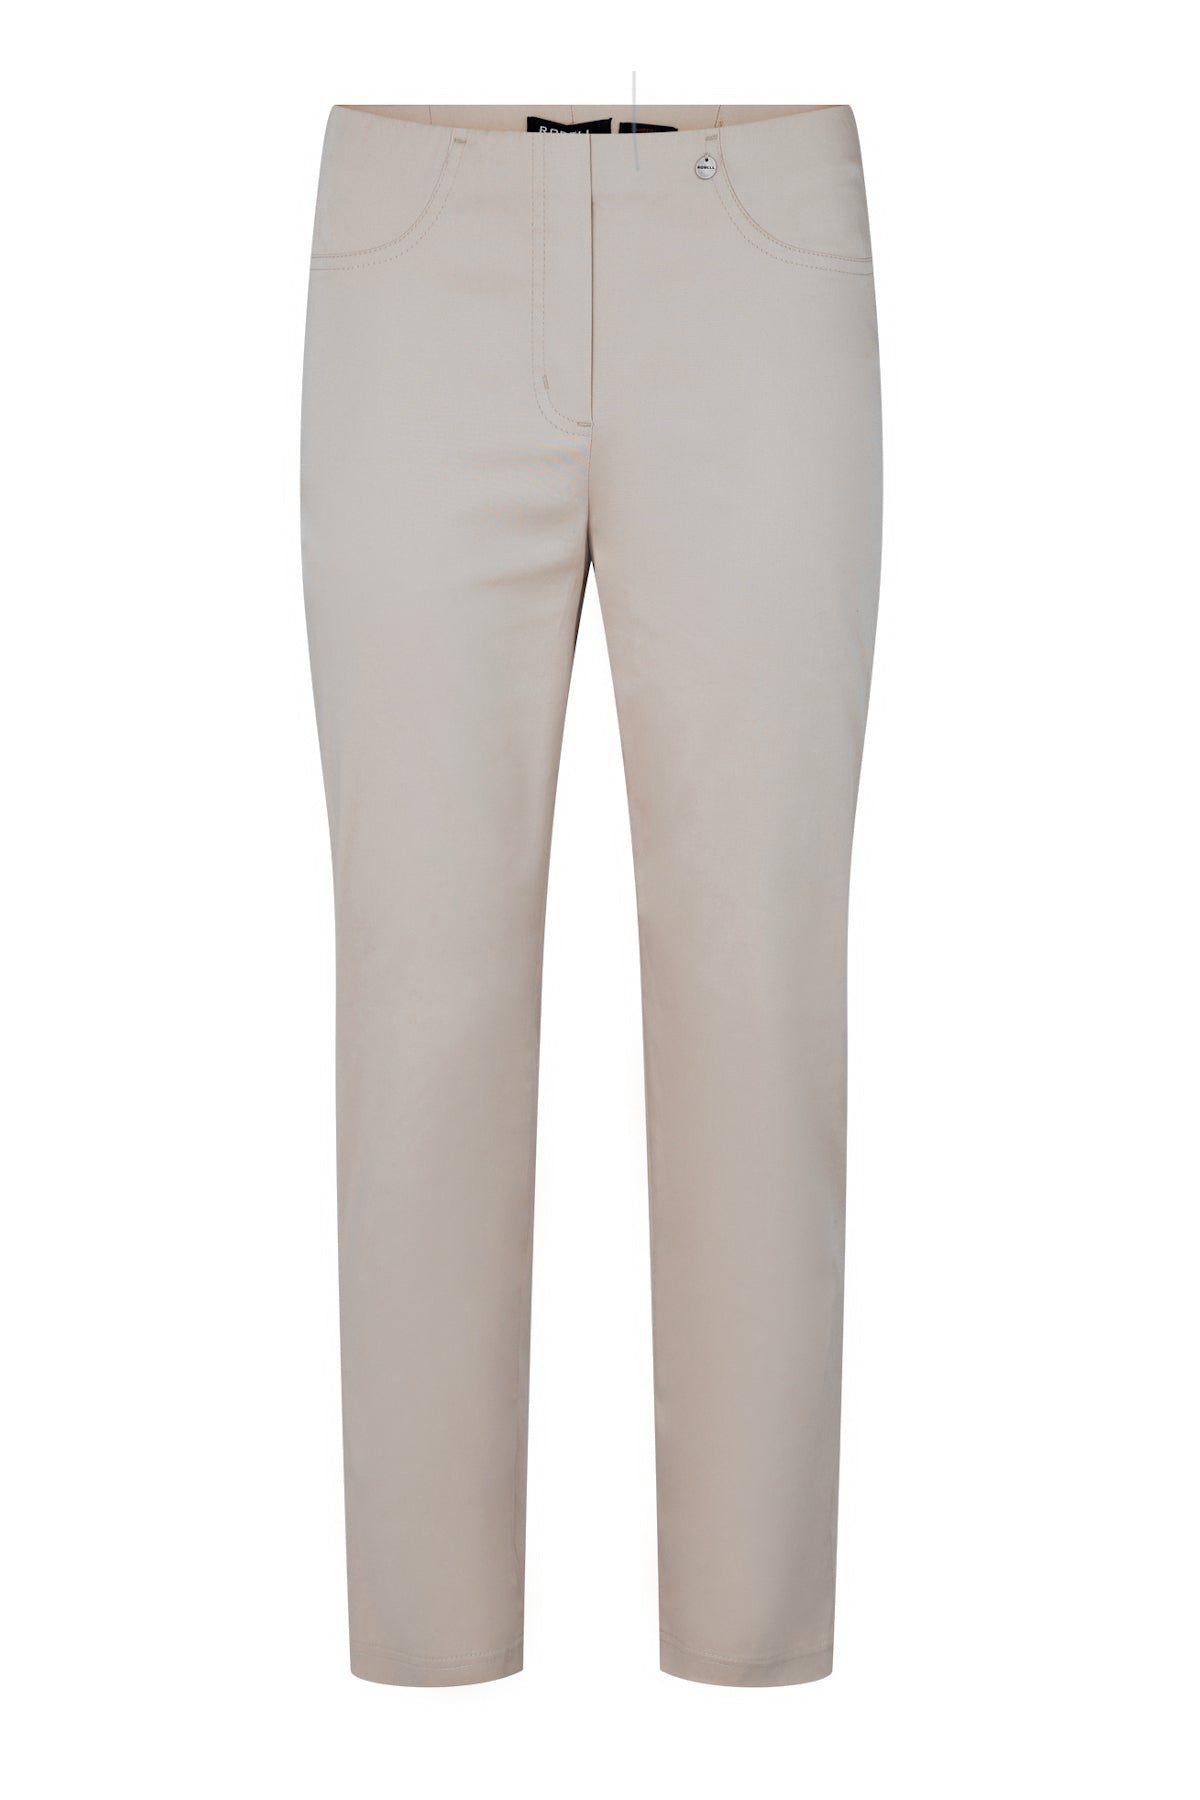 Robell Bella 7/8 Light  Grey Cropped Trousers